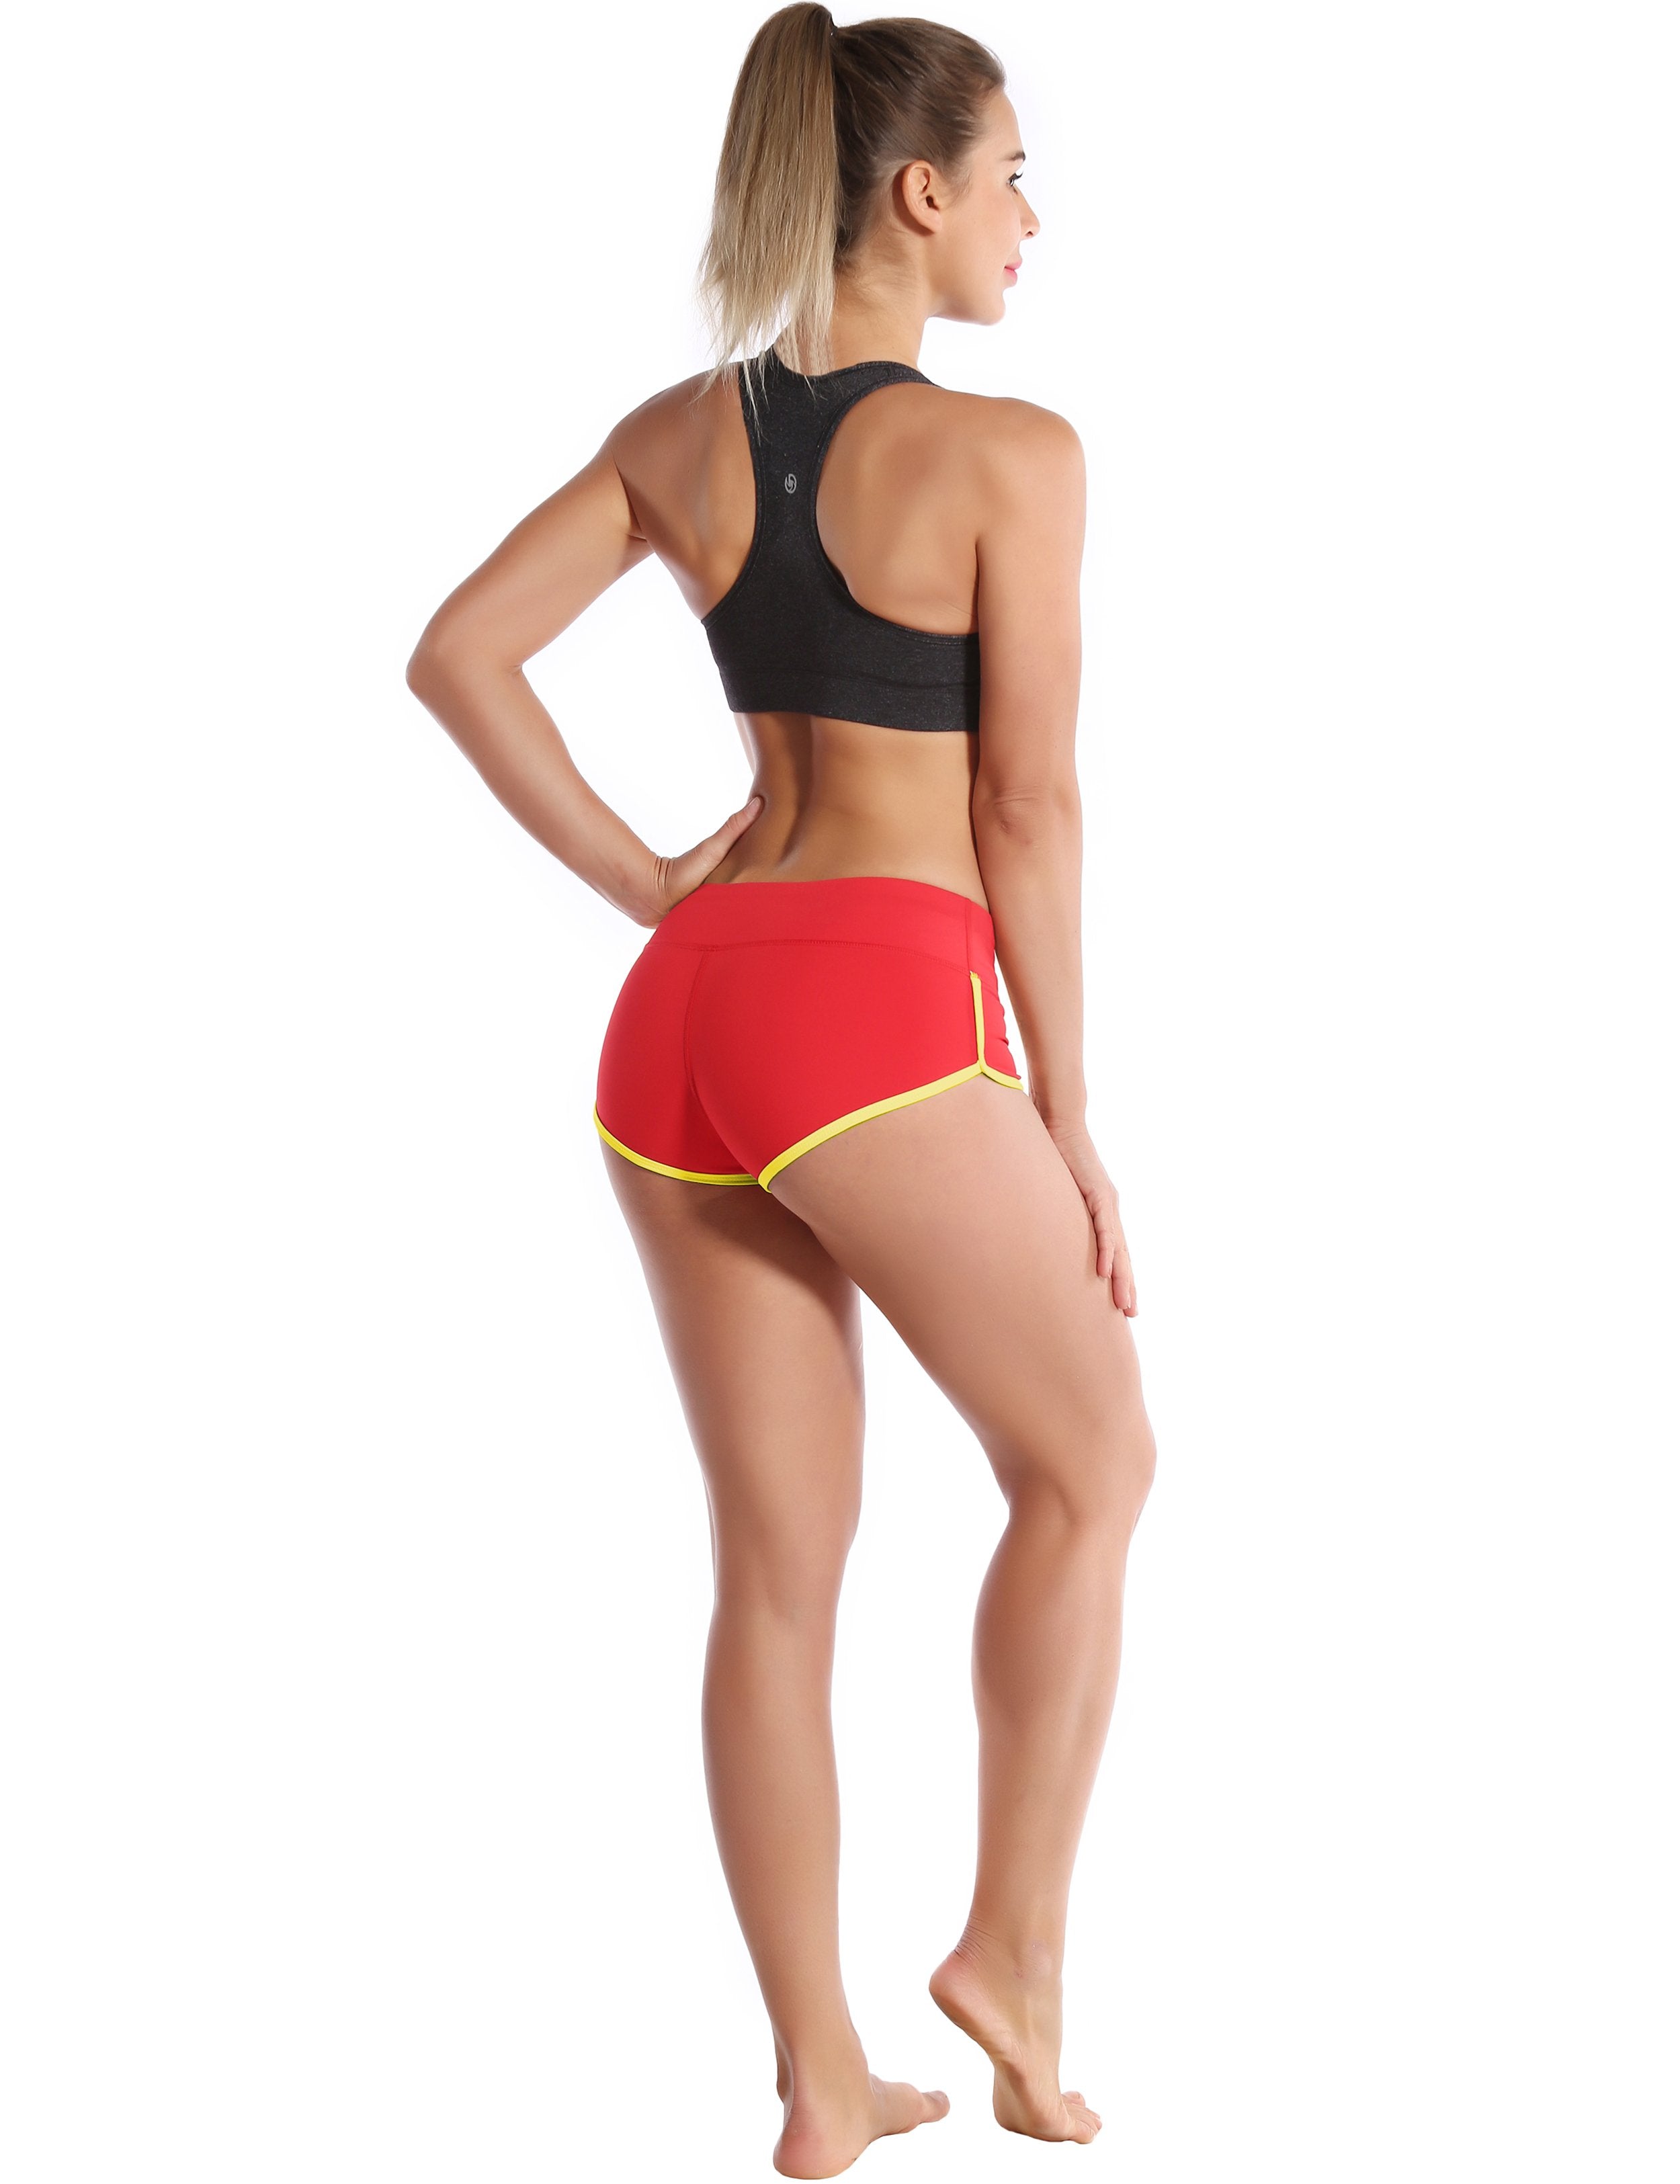 Sexy Booty Pilates Shorts scarlet_fluorescentyellow Sleek, soft, smooth and totally comfortable: our newest sexy style is here. Softest-ever fabric High elasticity High density 4-way stretch Fabric doesn't attract lint easily No see-through Moisture-wicking Machine wash 75%Nylon/25%Spandex